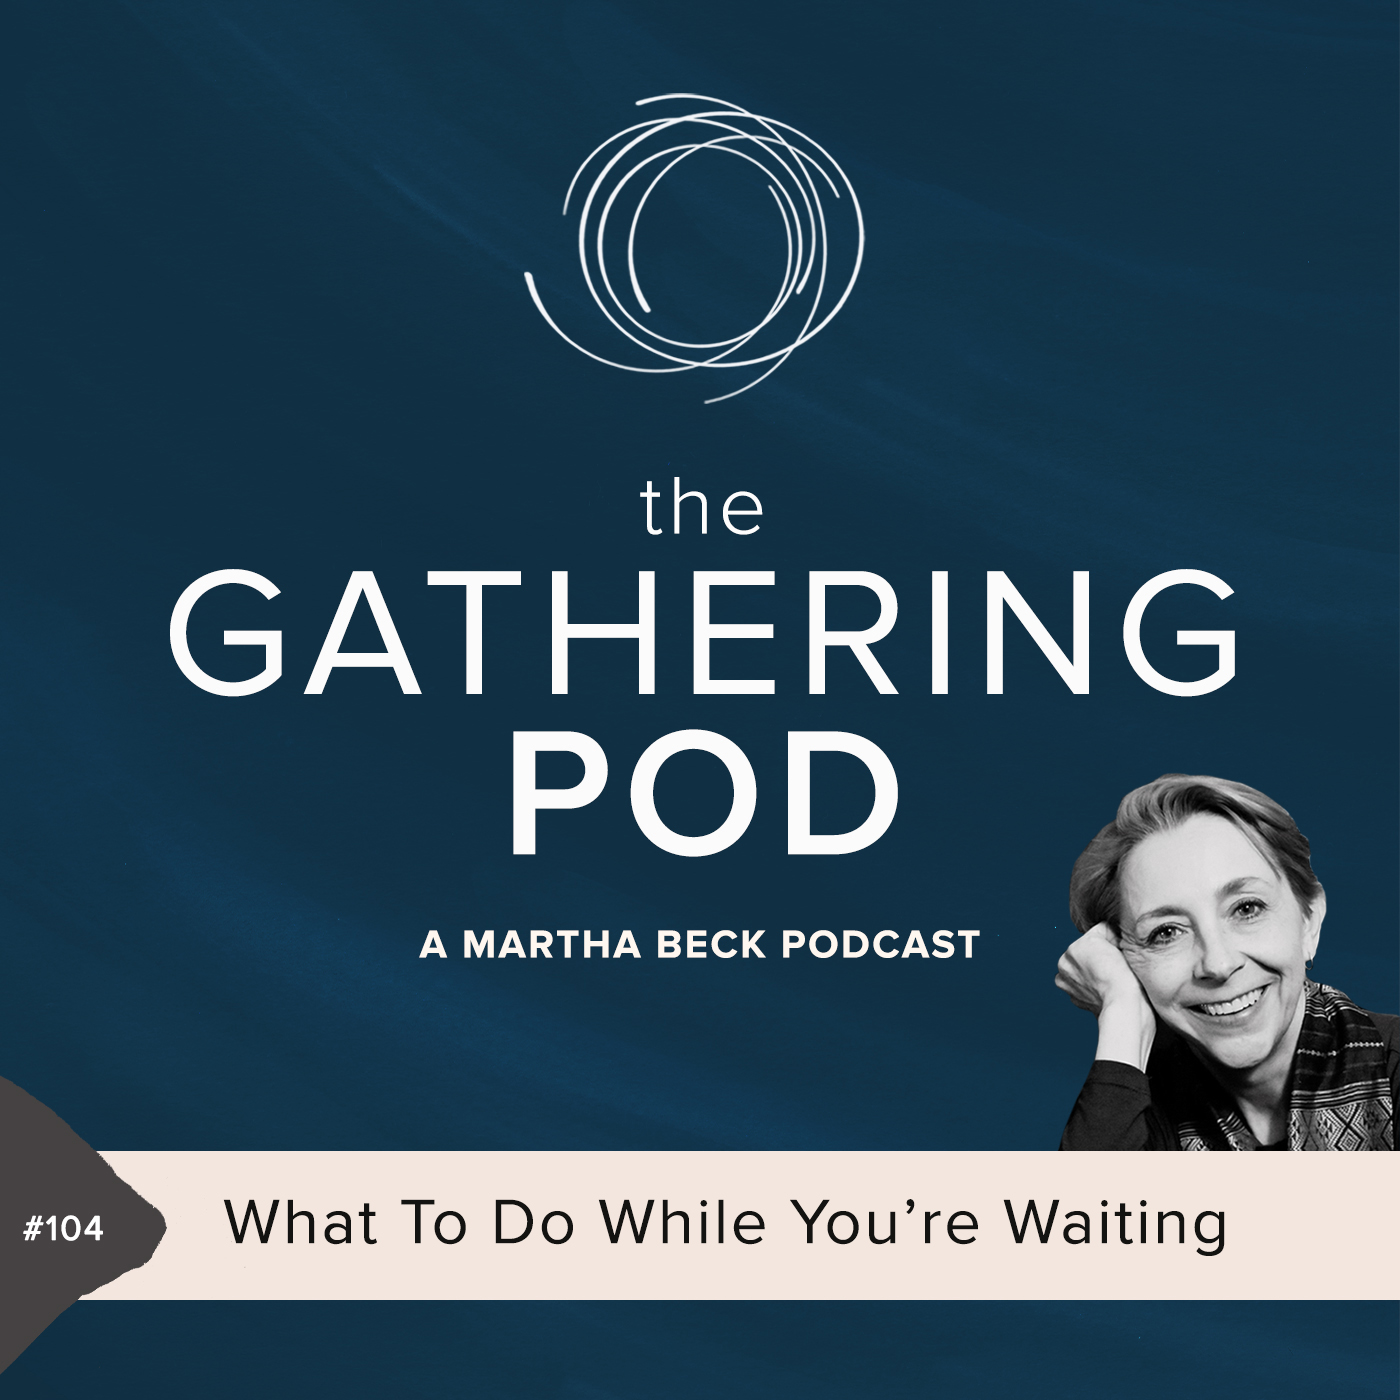 Image for The Gathering Pod A Martha Beck Podcast Episode #104 What To Do While You’re Waiting